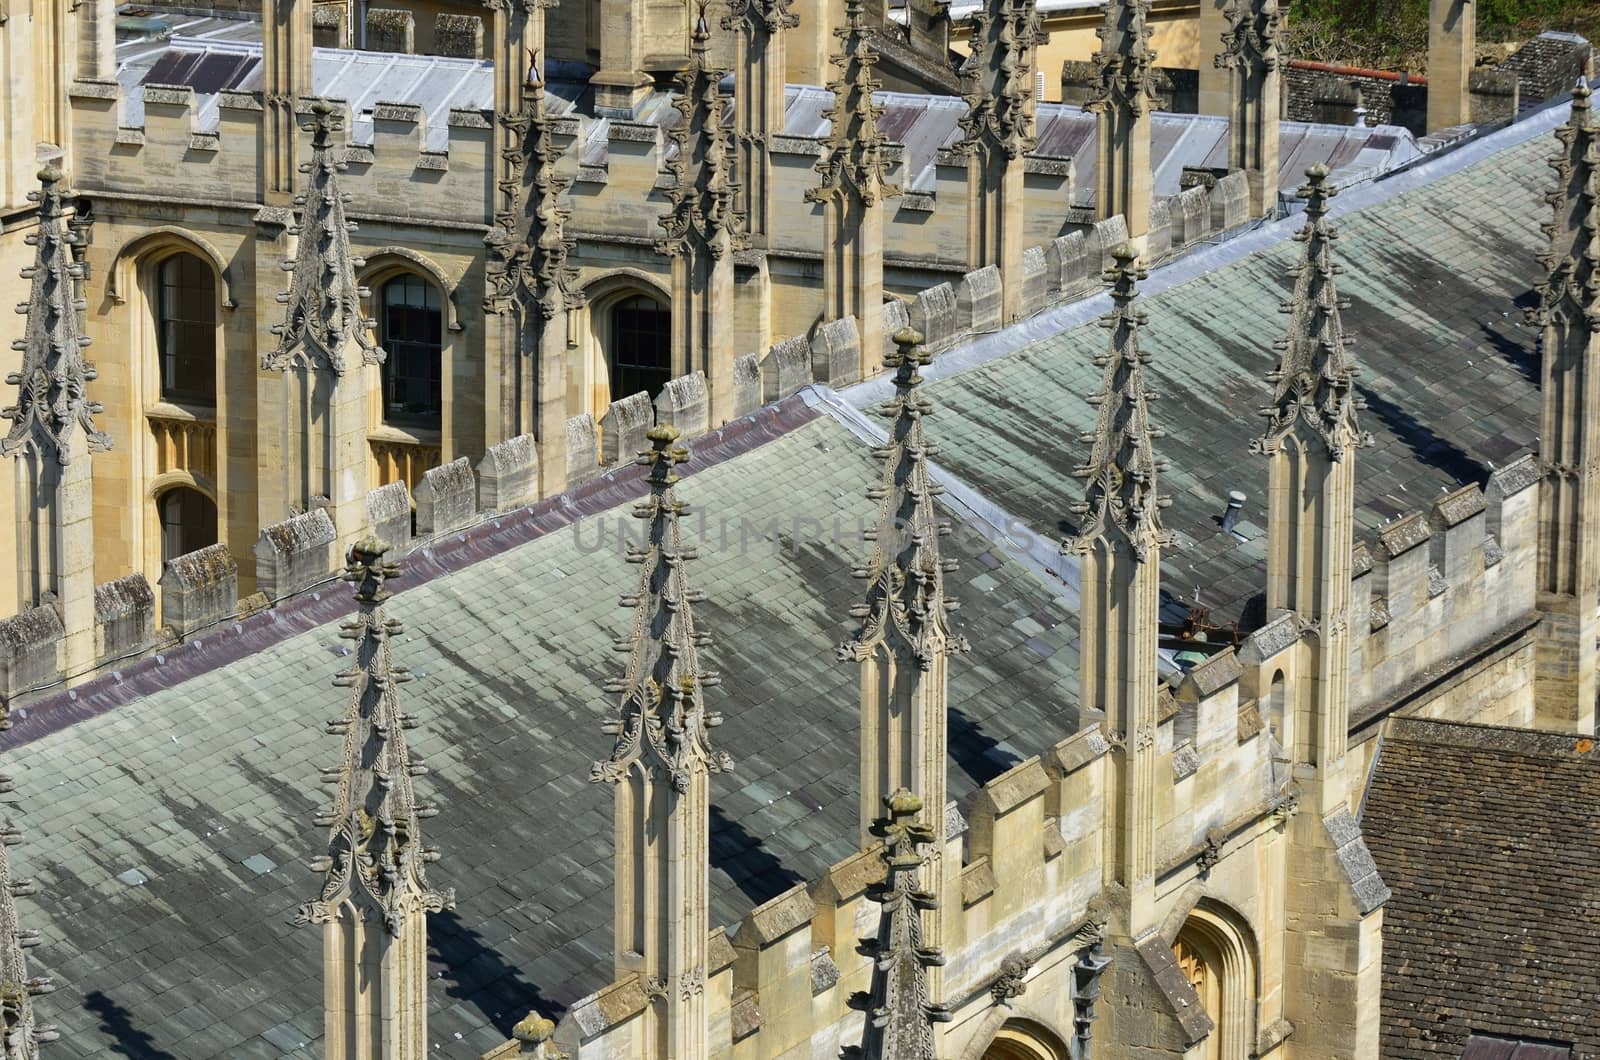 Church Roof tops Oxford by pauws99